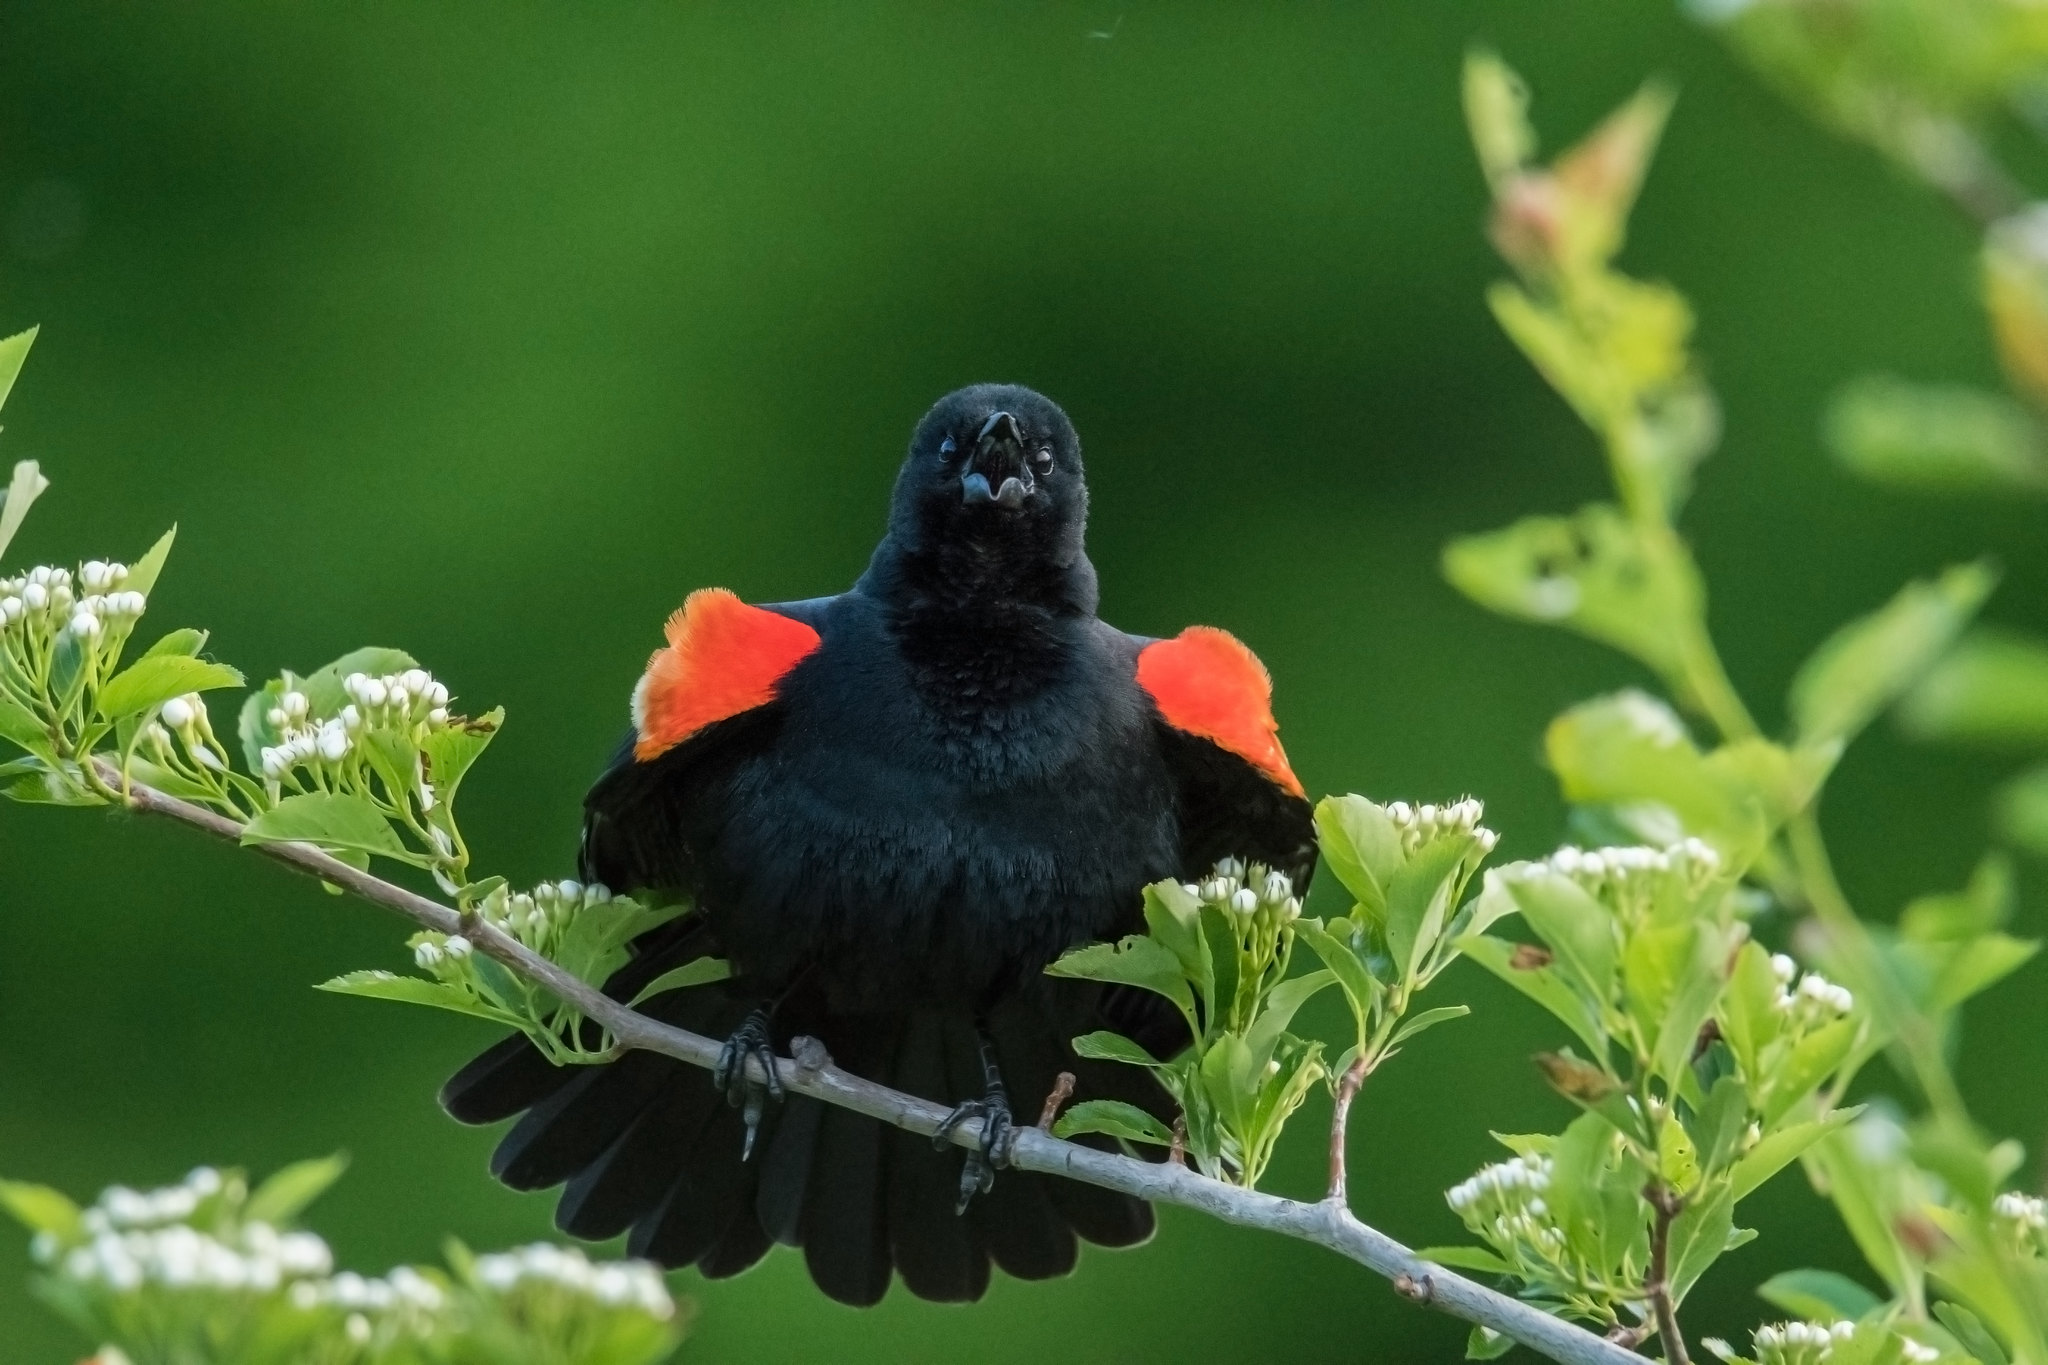 Another photo taken at CTC: a red-winged blackbird captured in the Sarita conservation area. 